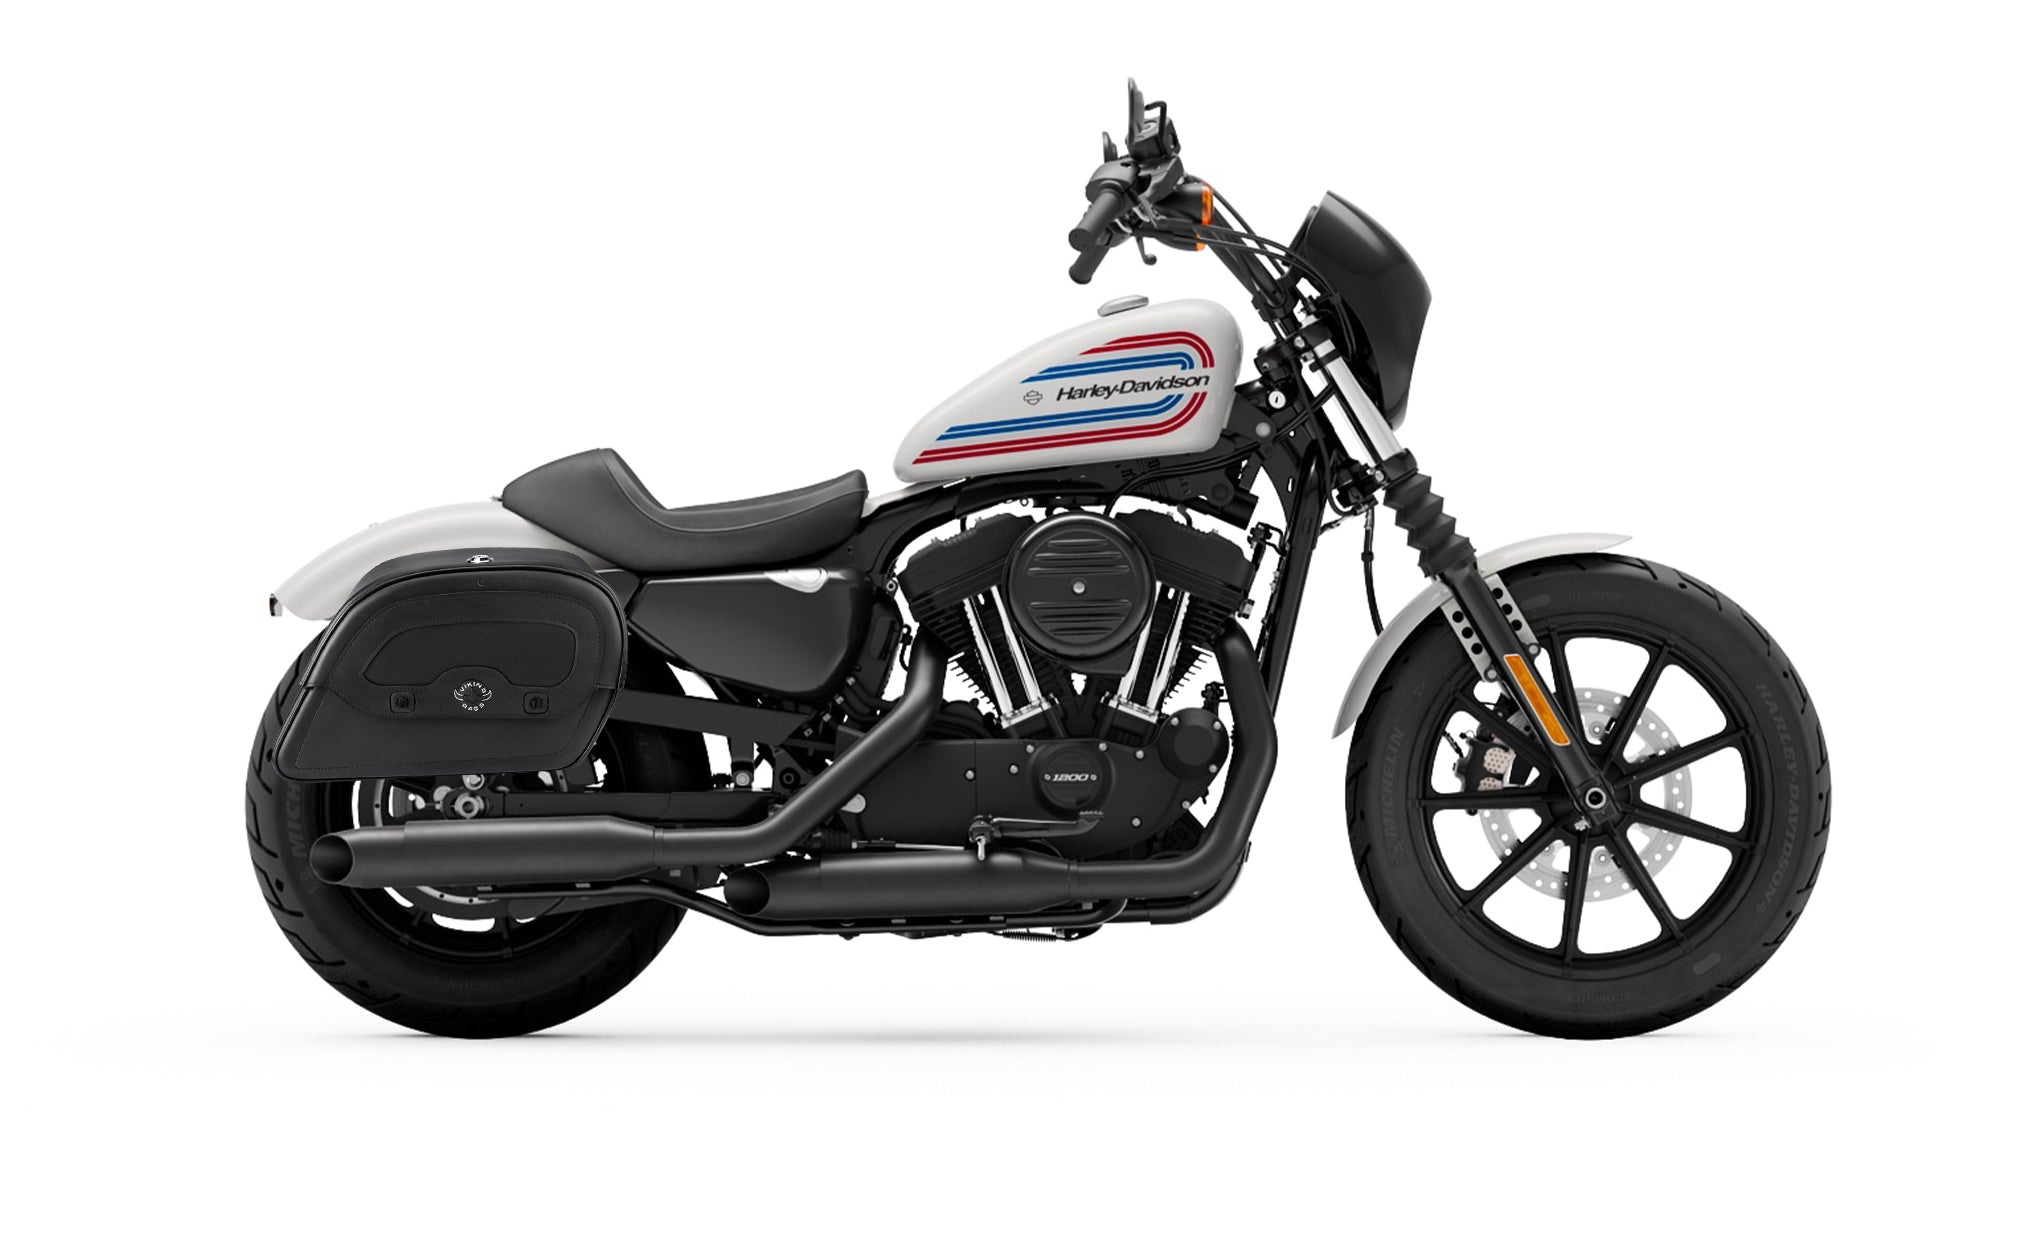 28L - Warrior Medium Quick-Mount Motorcycle Saddlebags For Harley Sportster Iron 1200 @expand